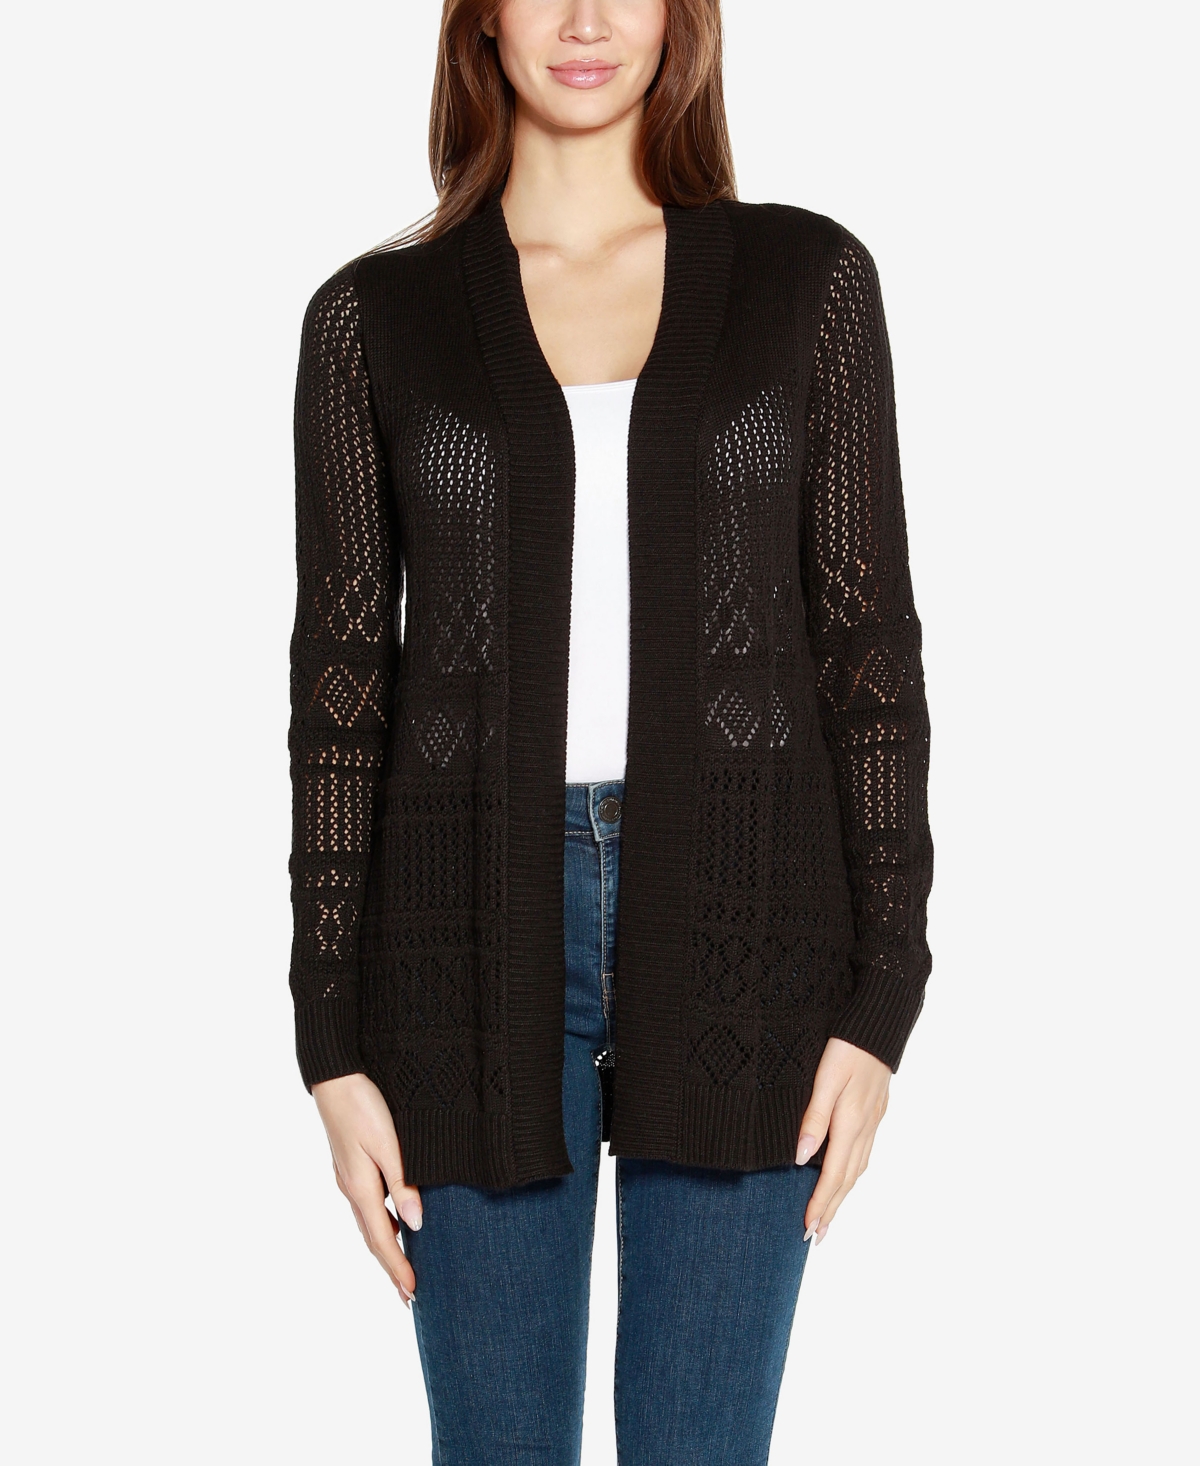 Belldini Plus Size Pointelle Long Sleeves Open Cardigan Sweater In Black